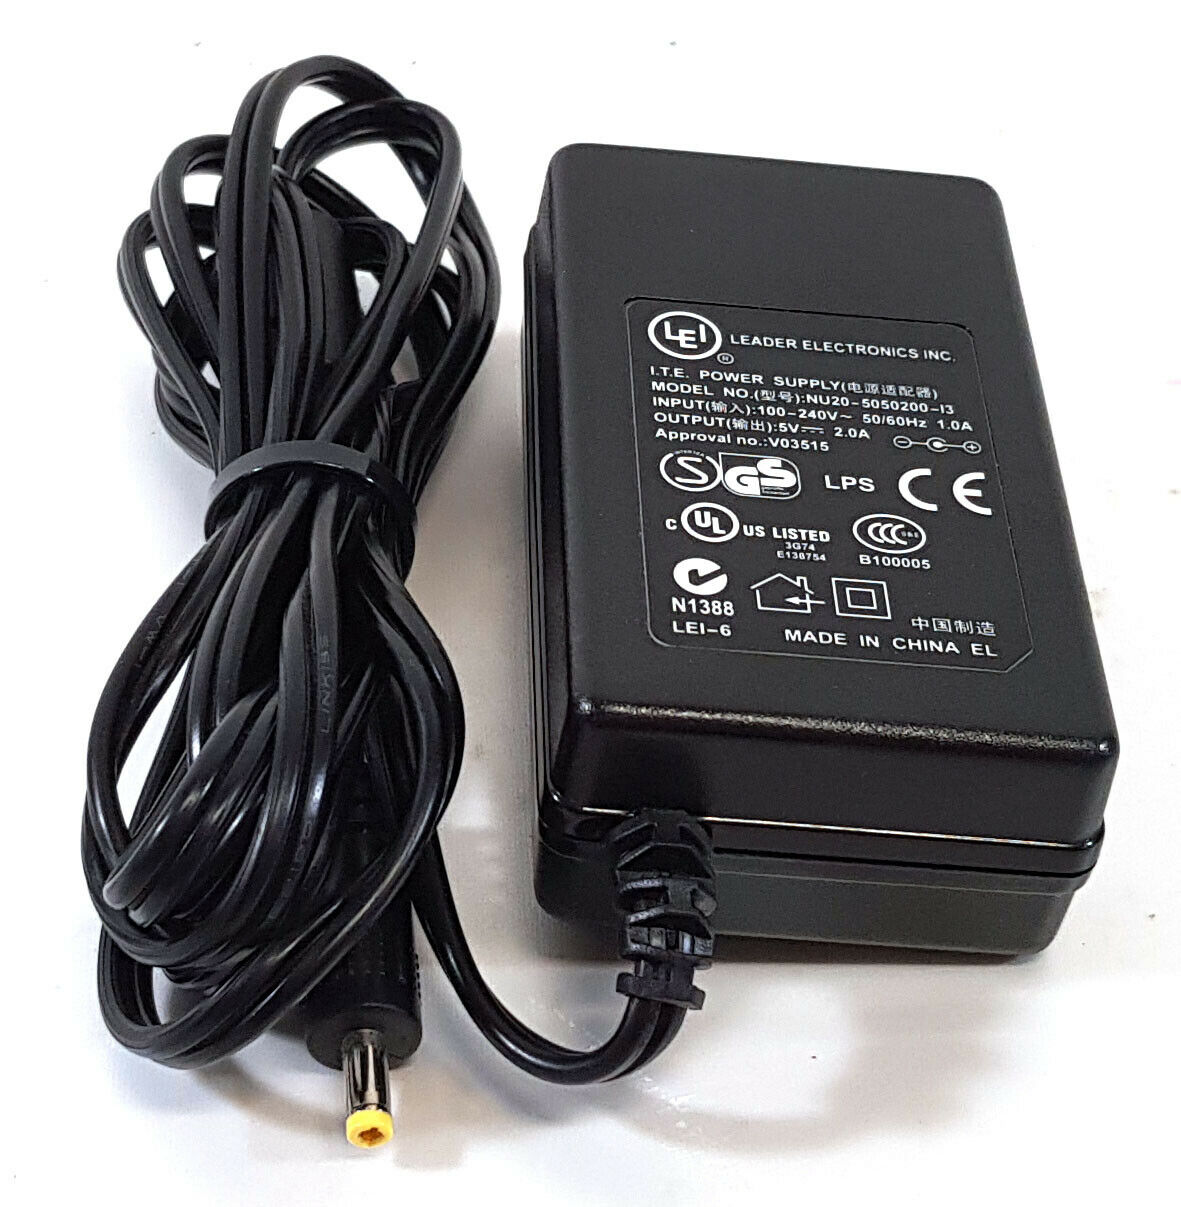 NEW LEI AC ADAPTER NU20-5050200-13 5V 2.0A POWER SUPPLY CHARGER - Click Image to Close